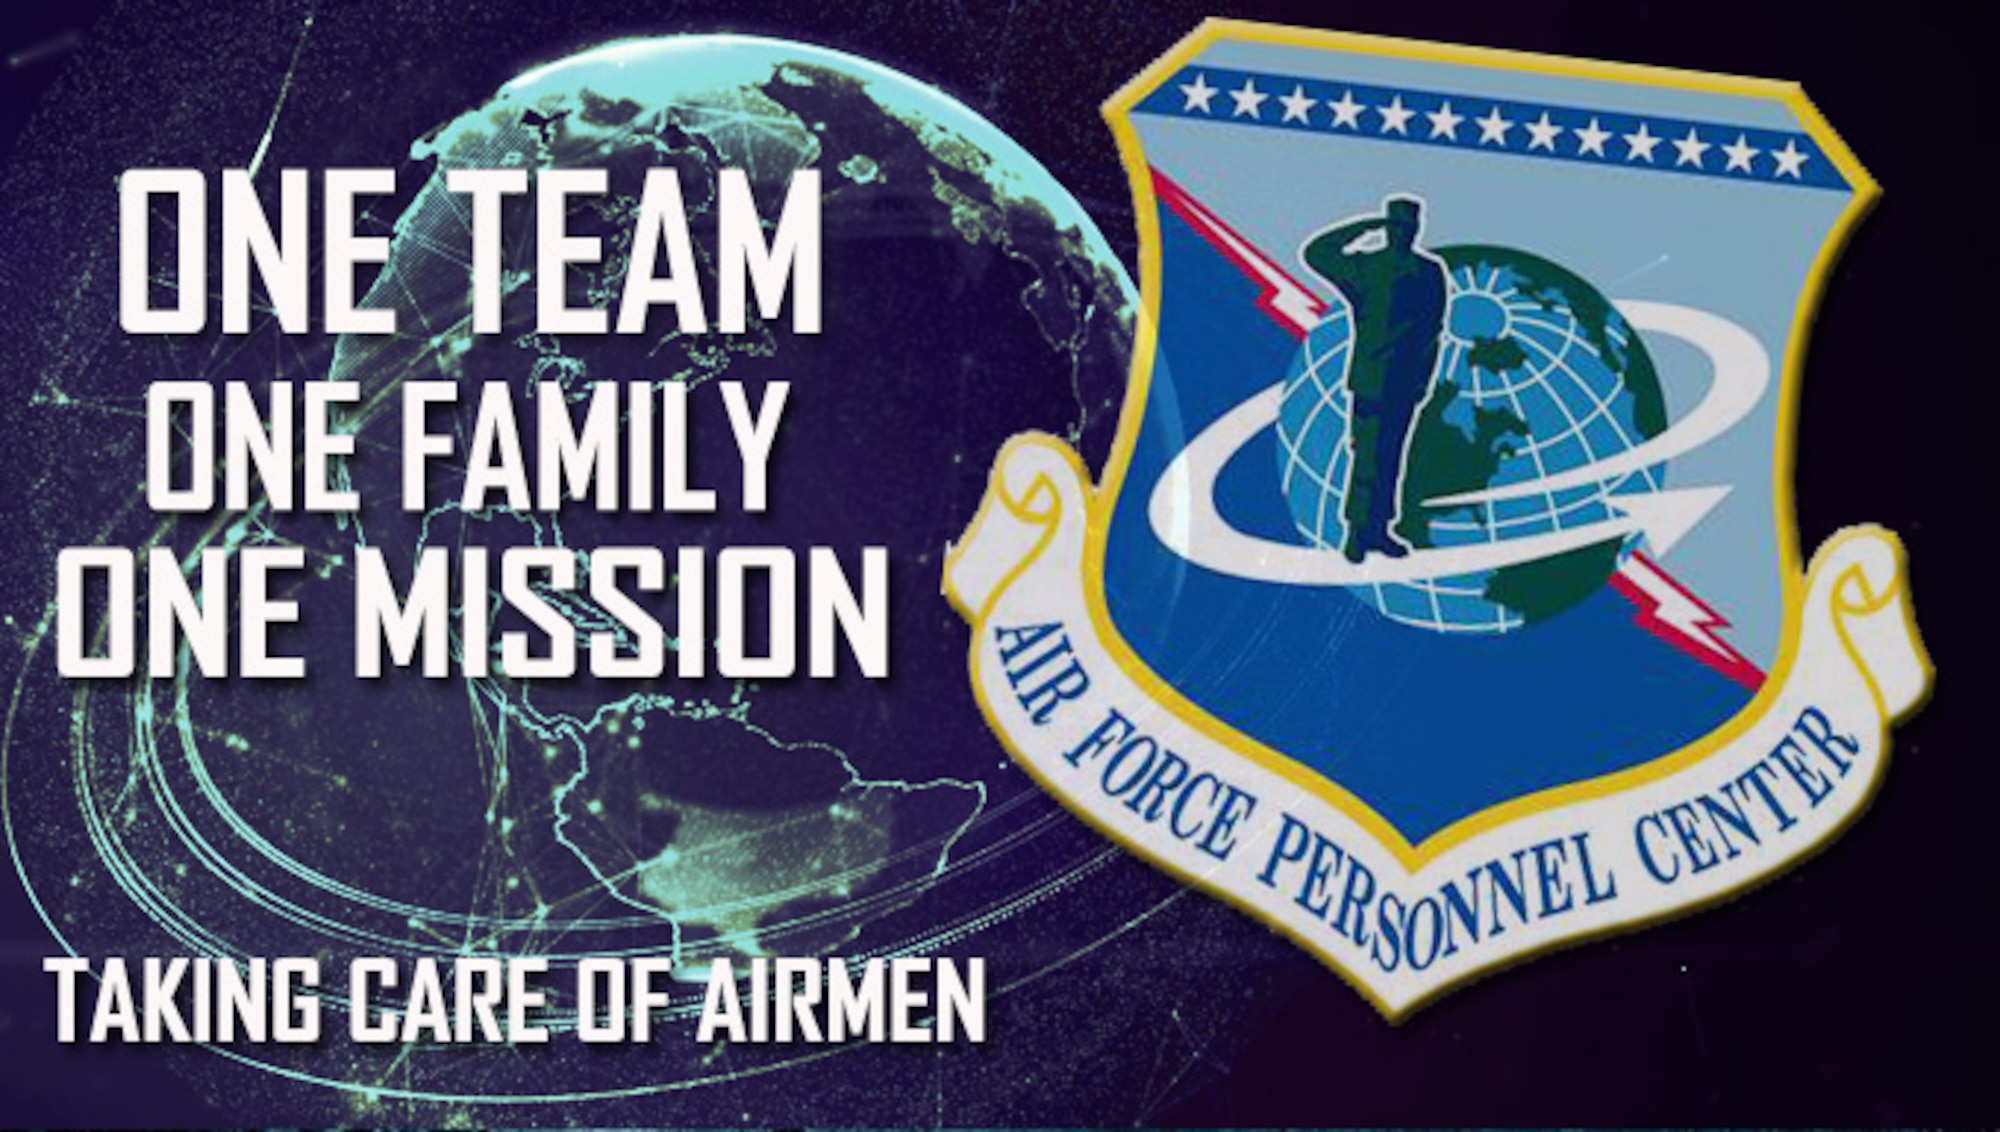 One team, one family, one mission graphic